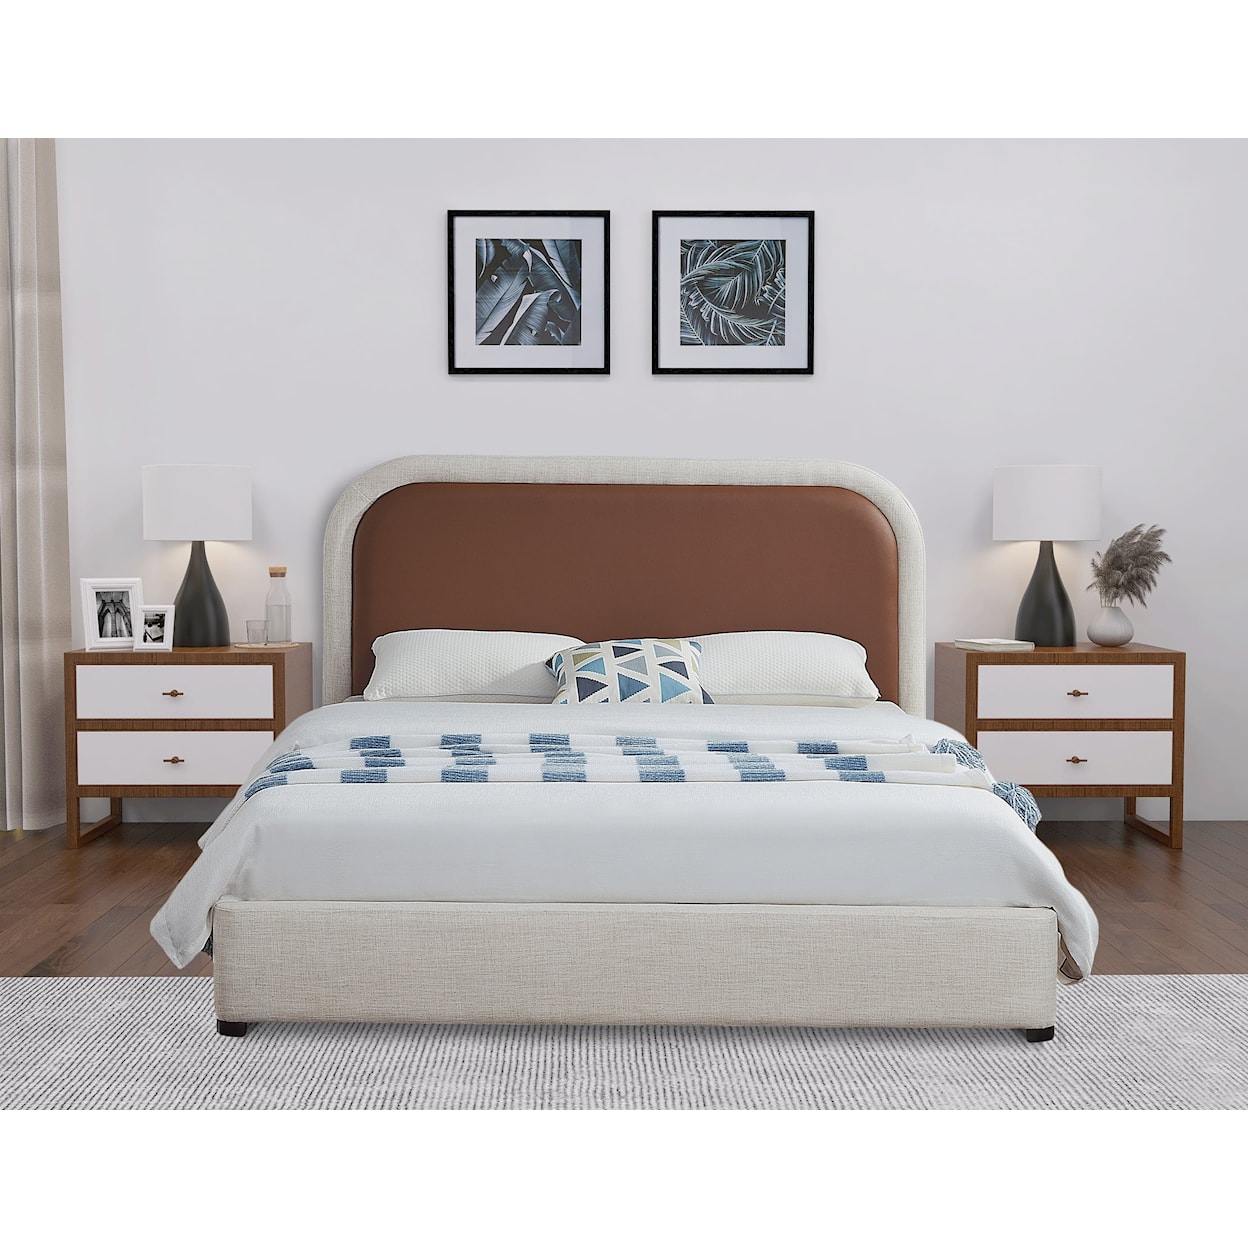 Meridian Furniture Blake Upholstered Low-Profile Queen Bed